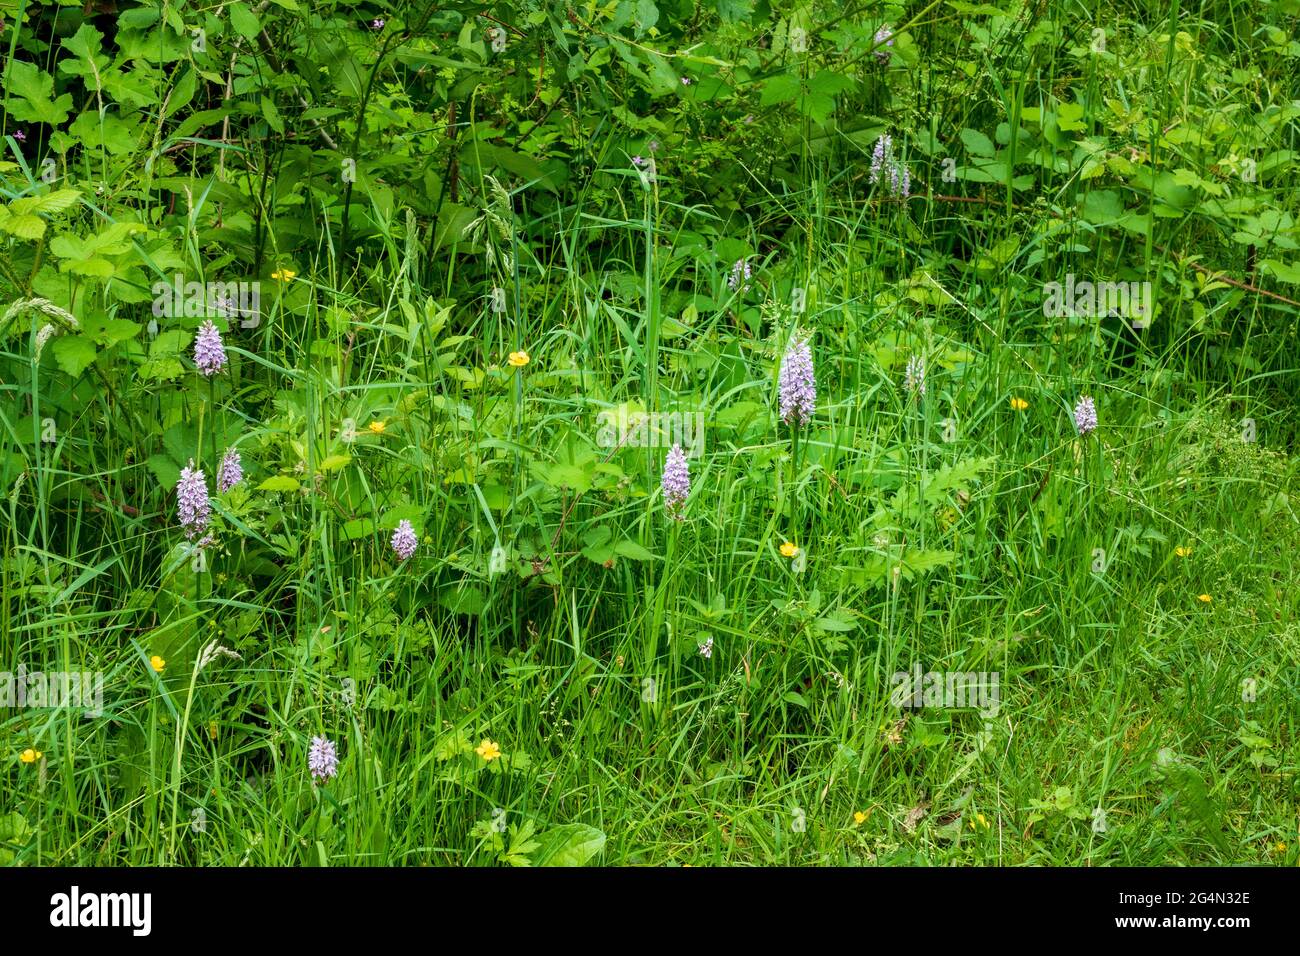 The common spotted orchid in a woodland setting Stock Photo